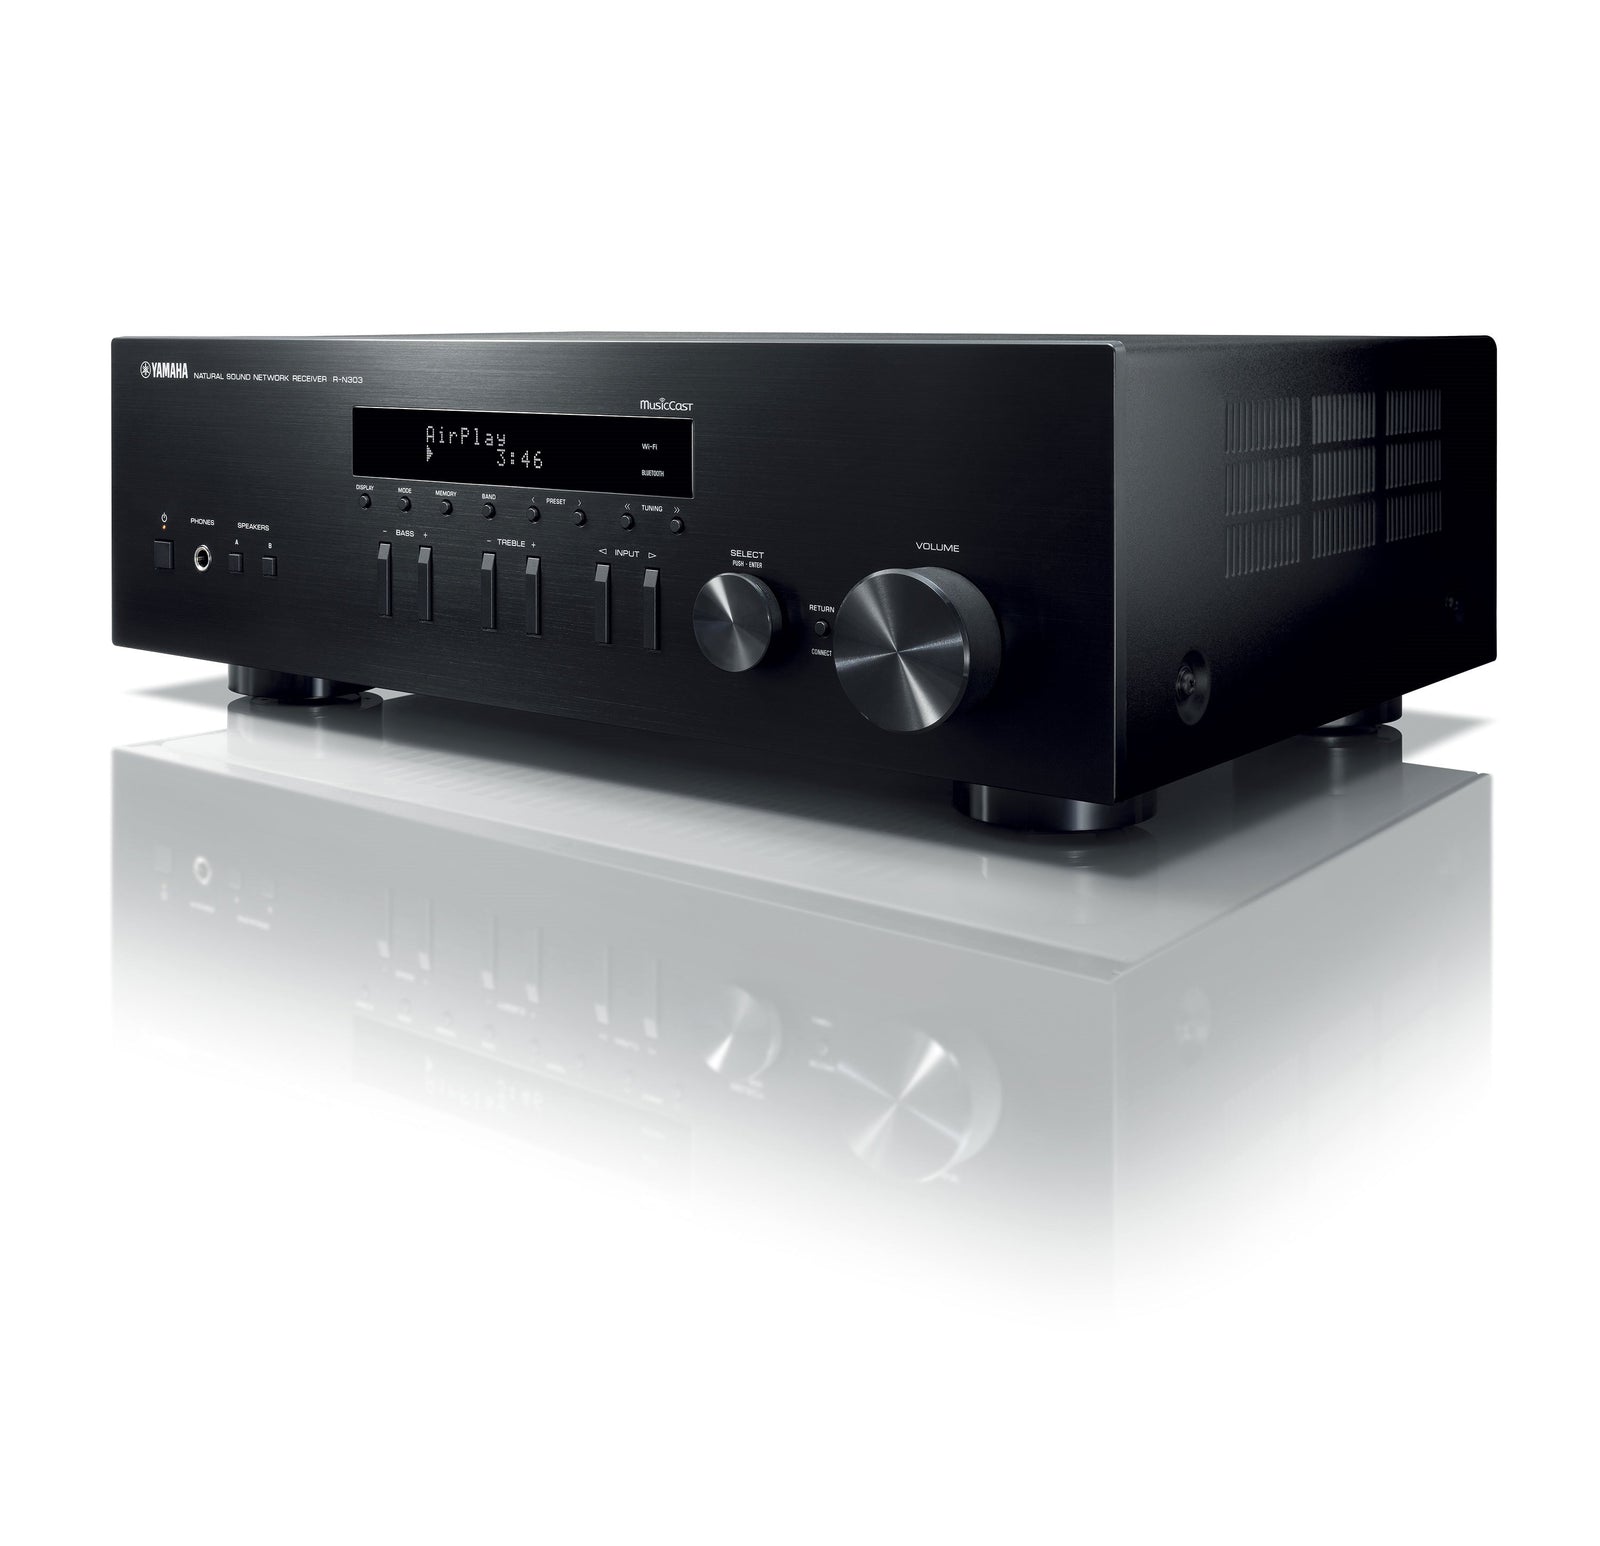 Yamaha R-N303 - 2ch Receivers Features Maximise Your Listening Pleasure Hi-Fi quality for all your music Make the Yamaha R-N303 Hi-Fi receiver the centerpiece of your audio system, and get streaming music services, music from your smart phone, network audio